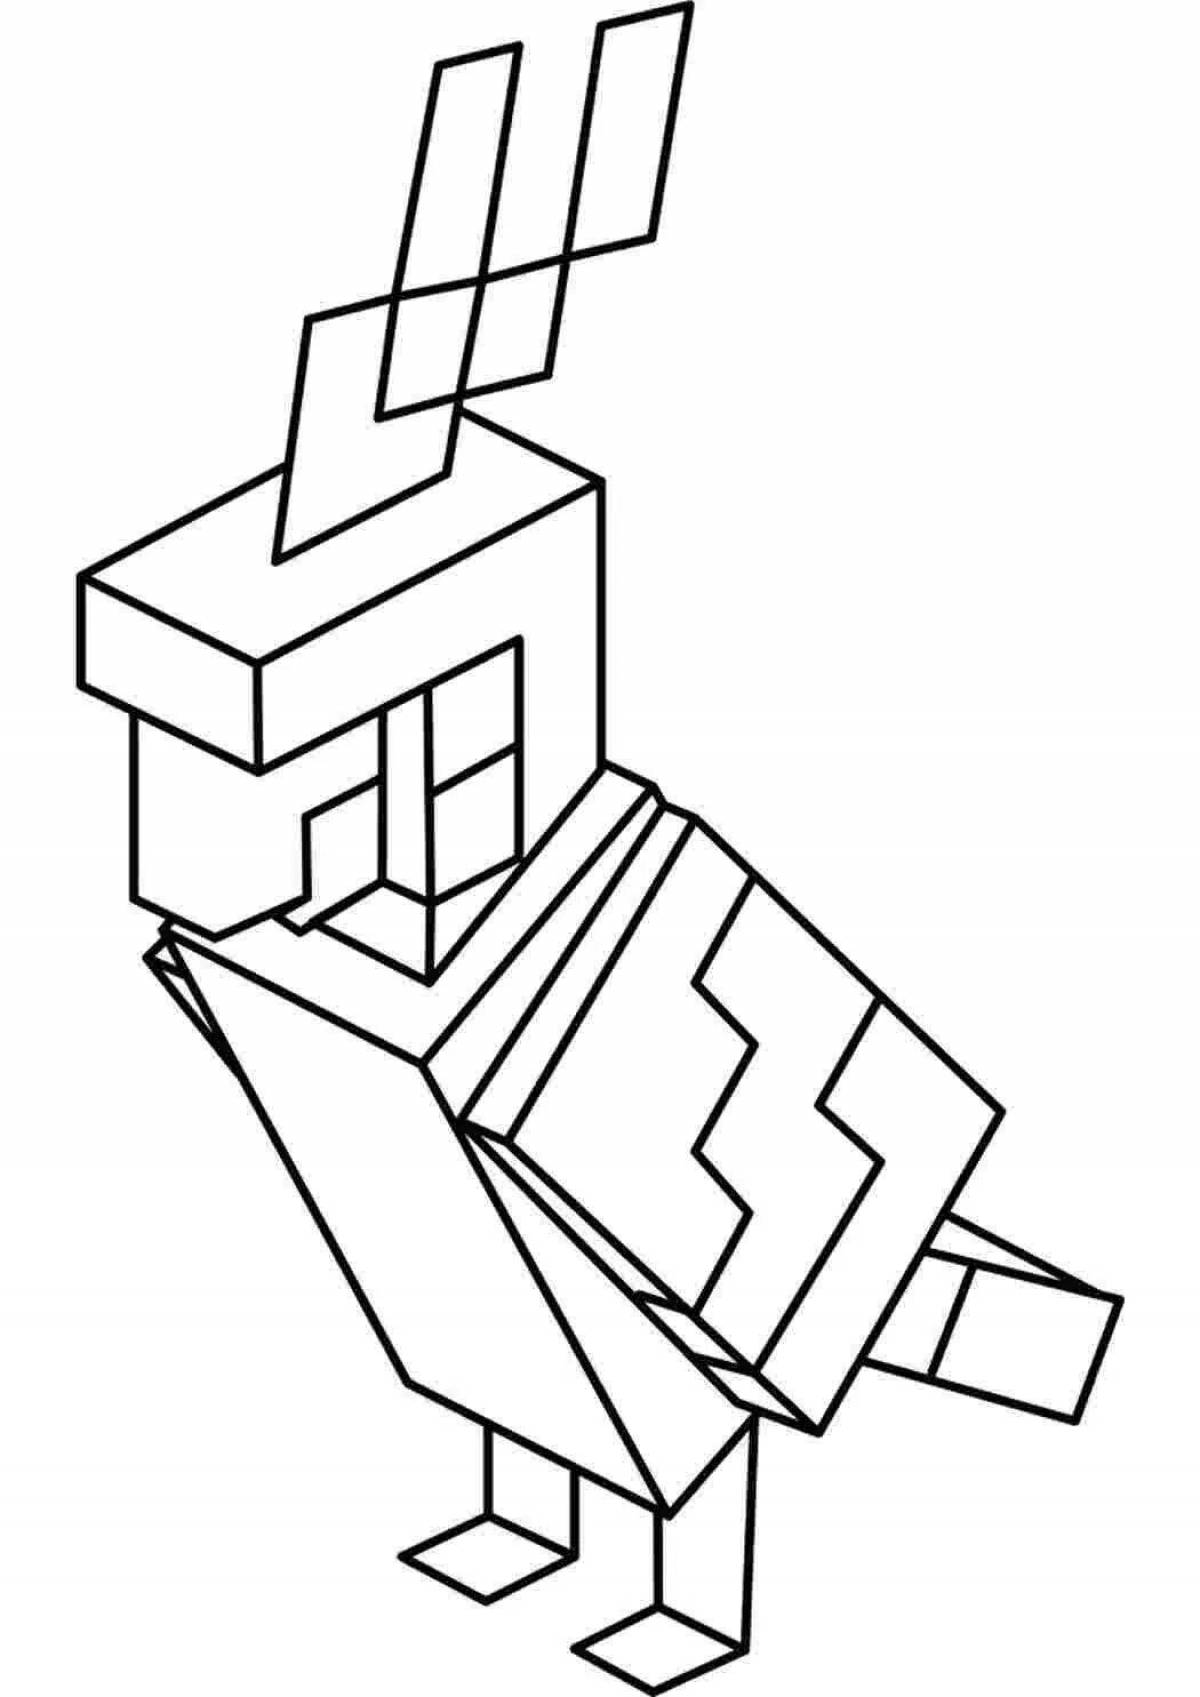 Amazing minecraft visor coloring page